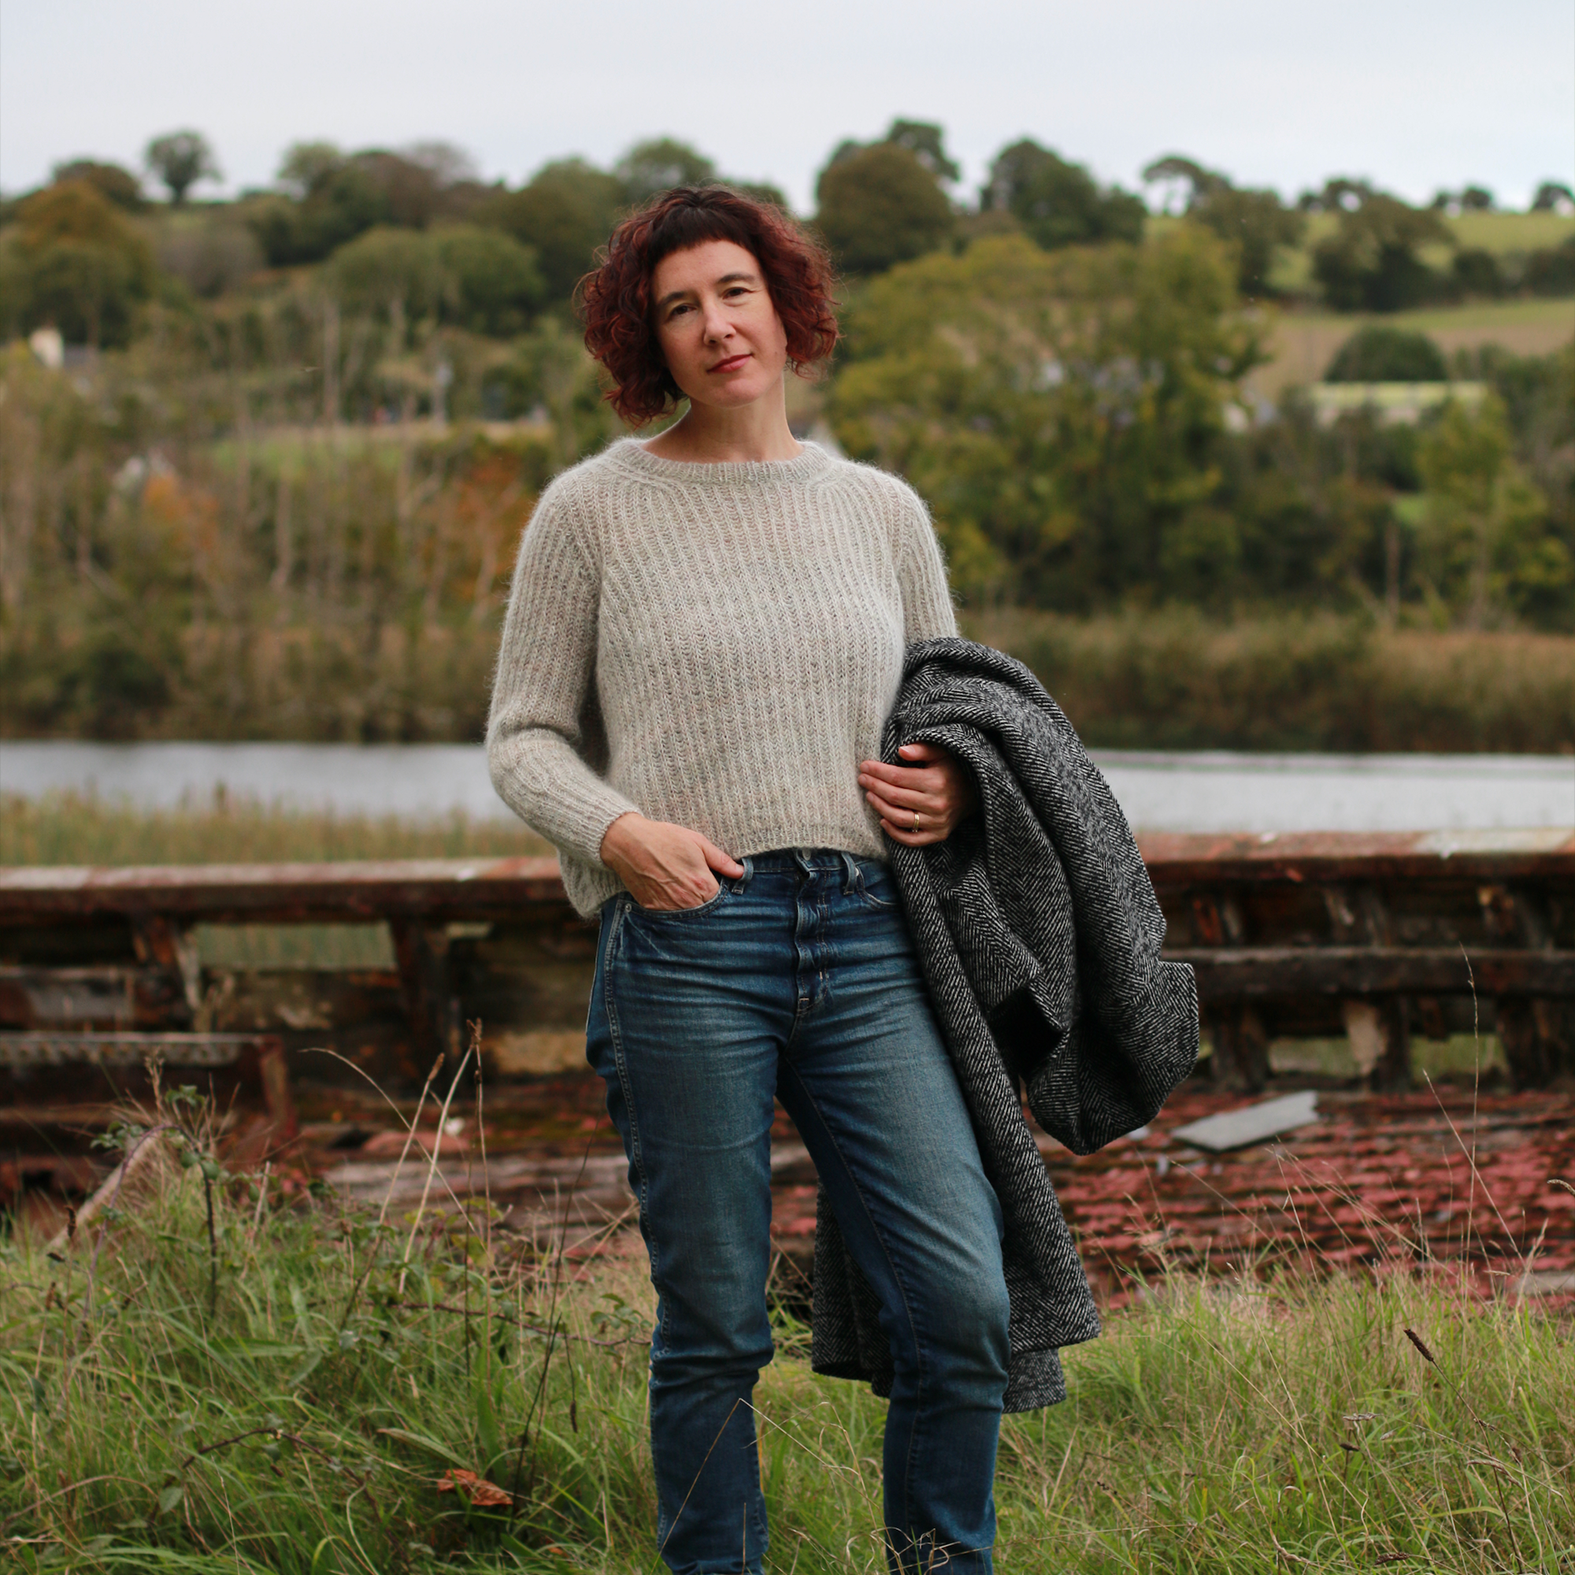 Iascaire Sweater Pattern